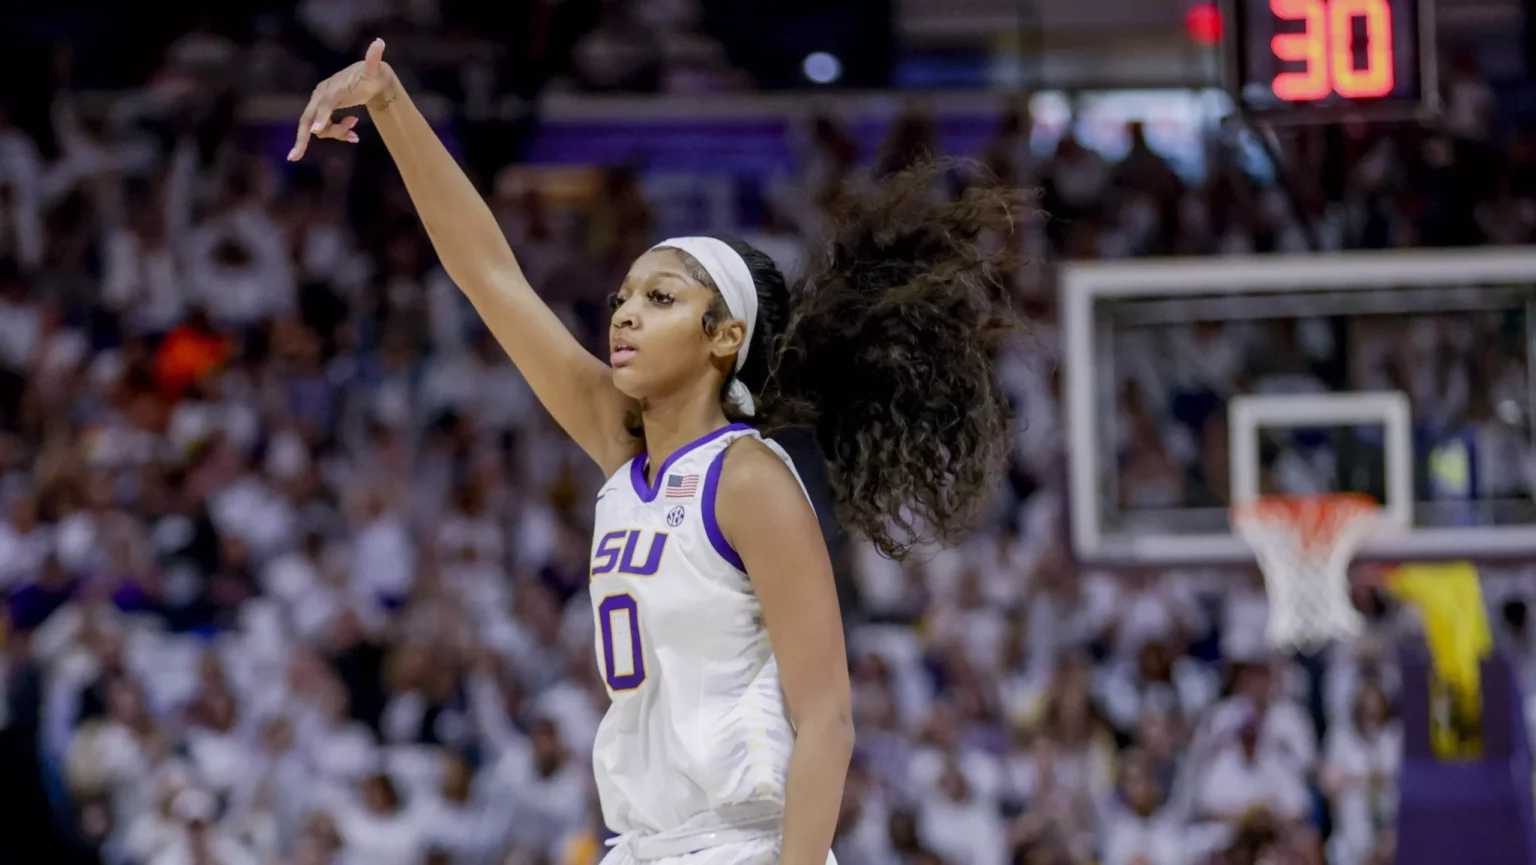 lsu-women-basketball-team-will-officially-visit-the-white-house-after-a-long-controversy